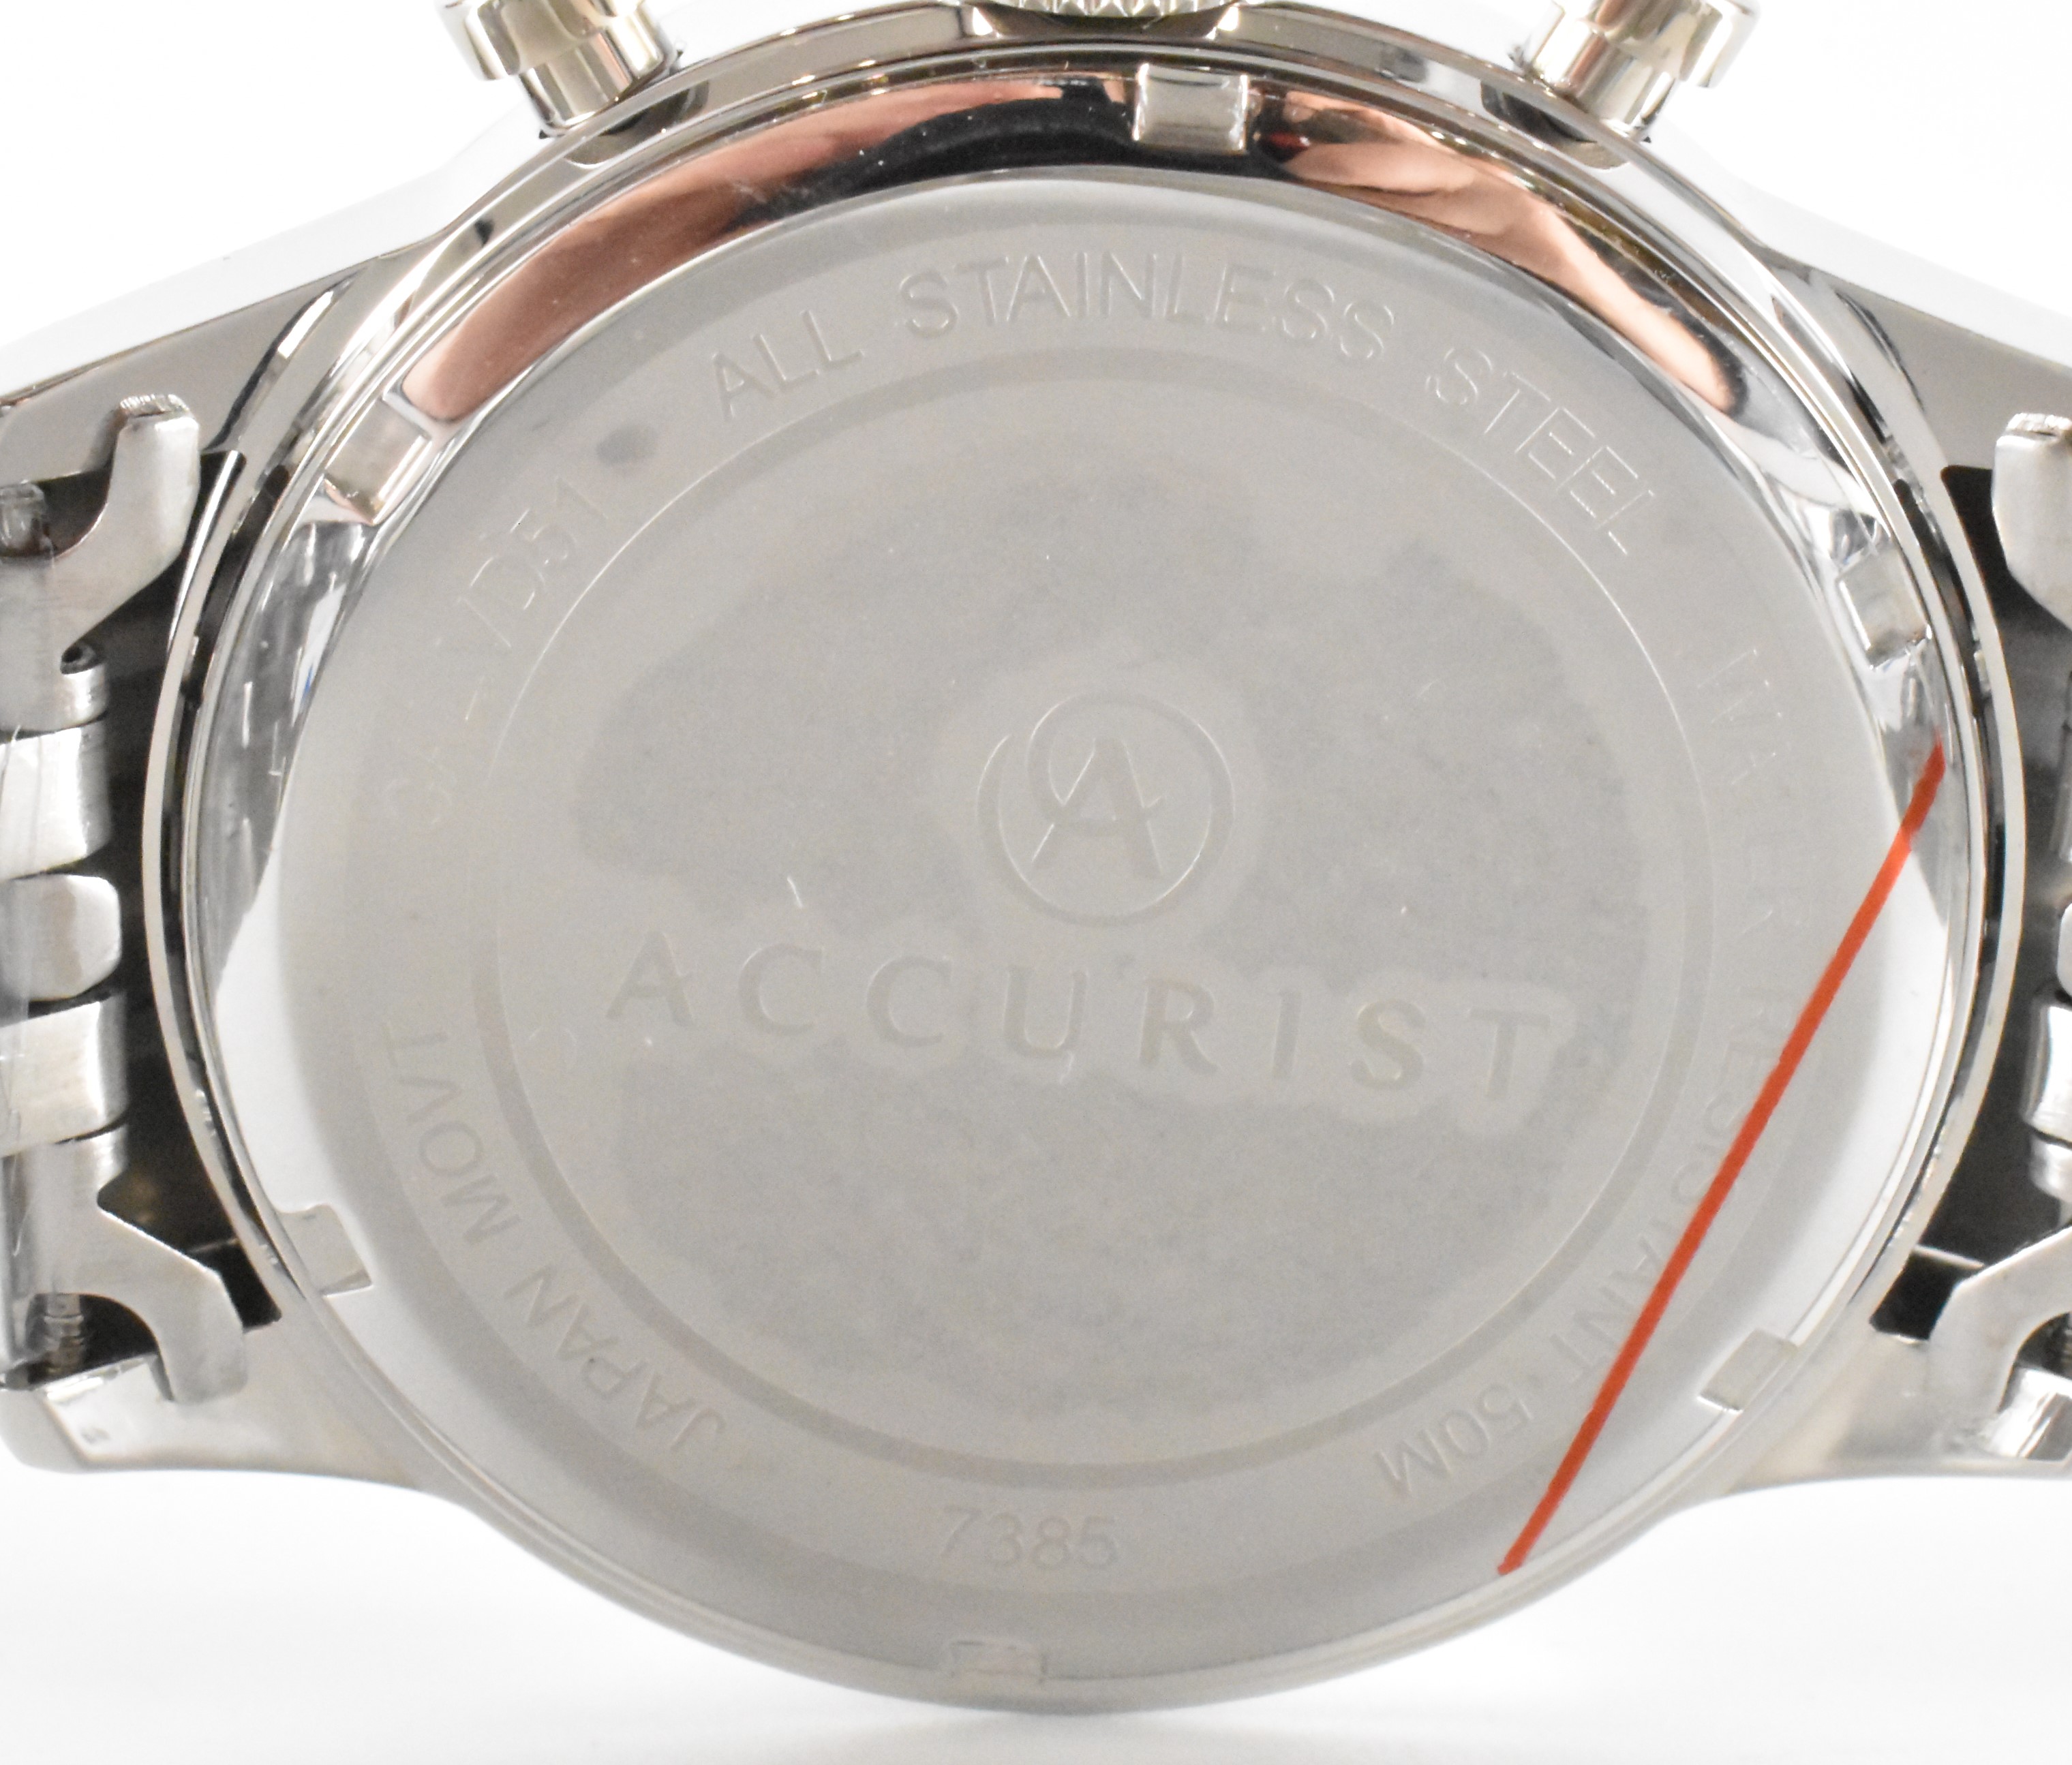 ACCURIST STAINLESS STEEL CHRONOGRAPH WRISTWATCH - Image 4 of 5